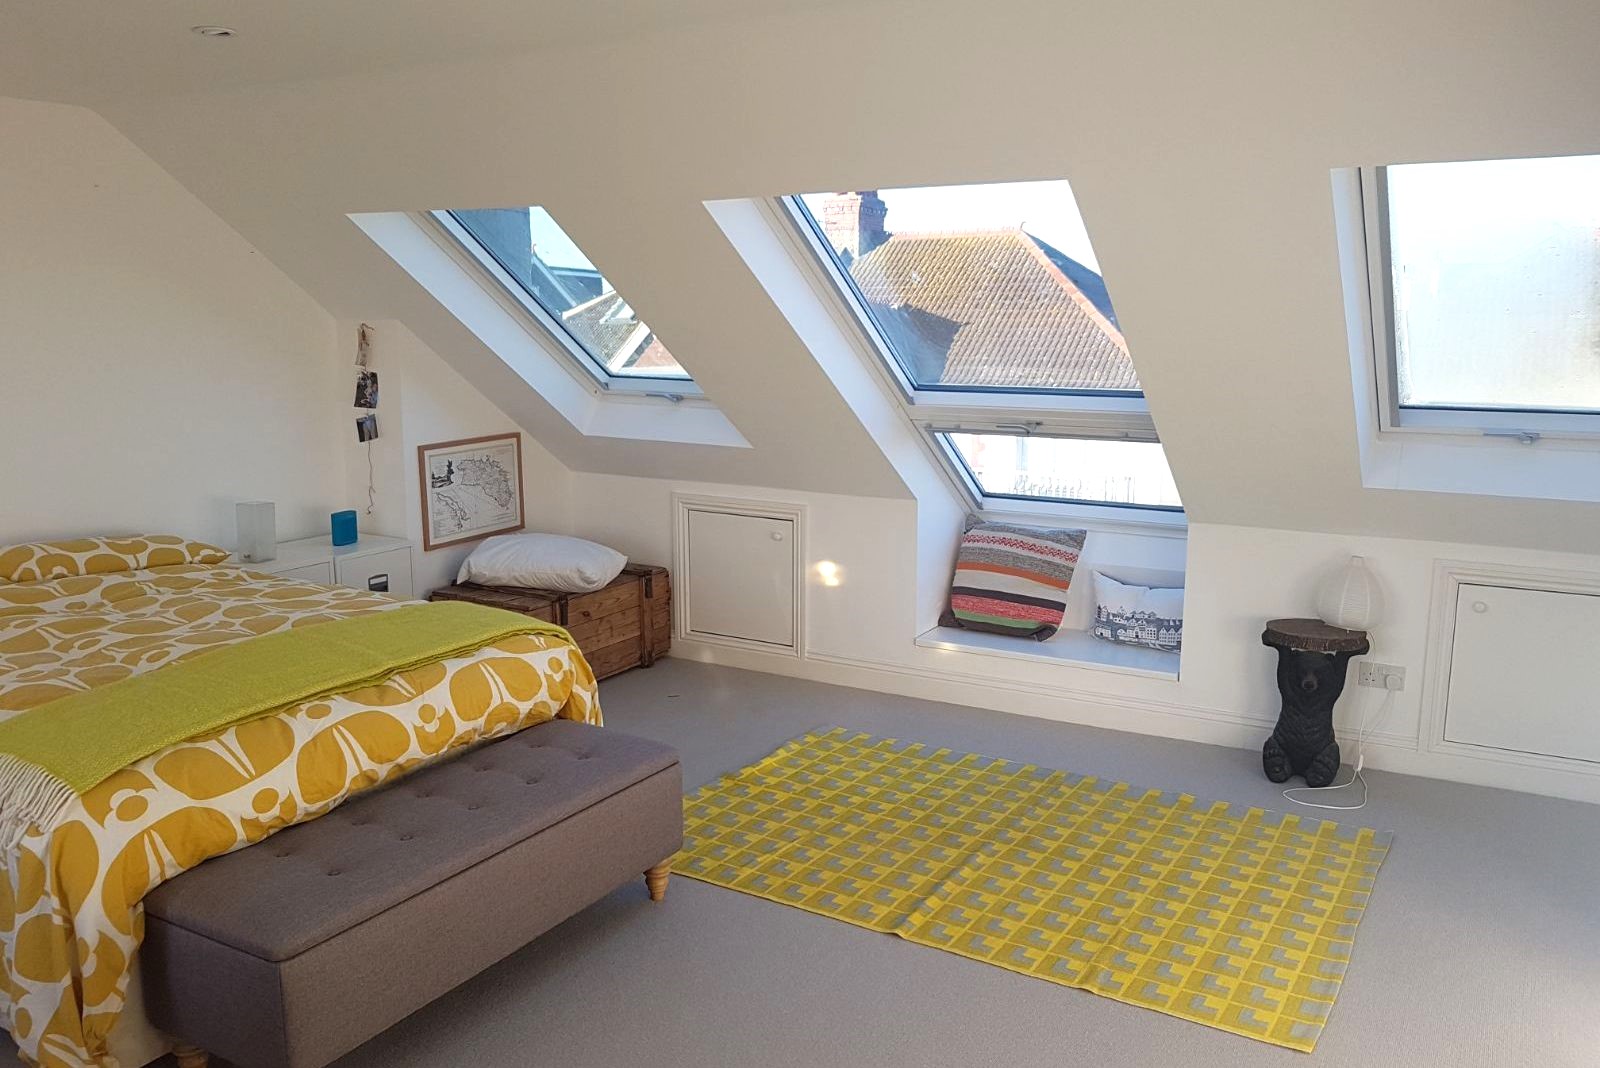 Loft extension example for architectural design services in the South East